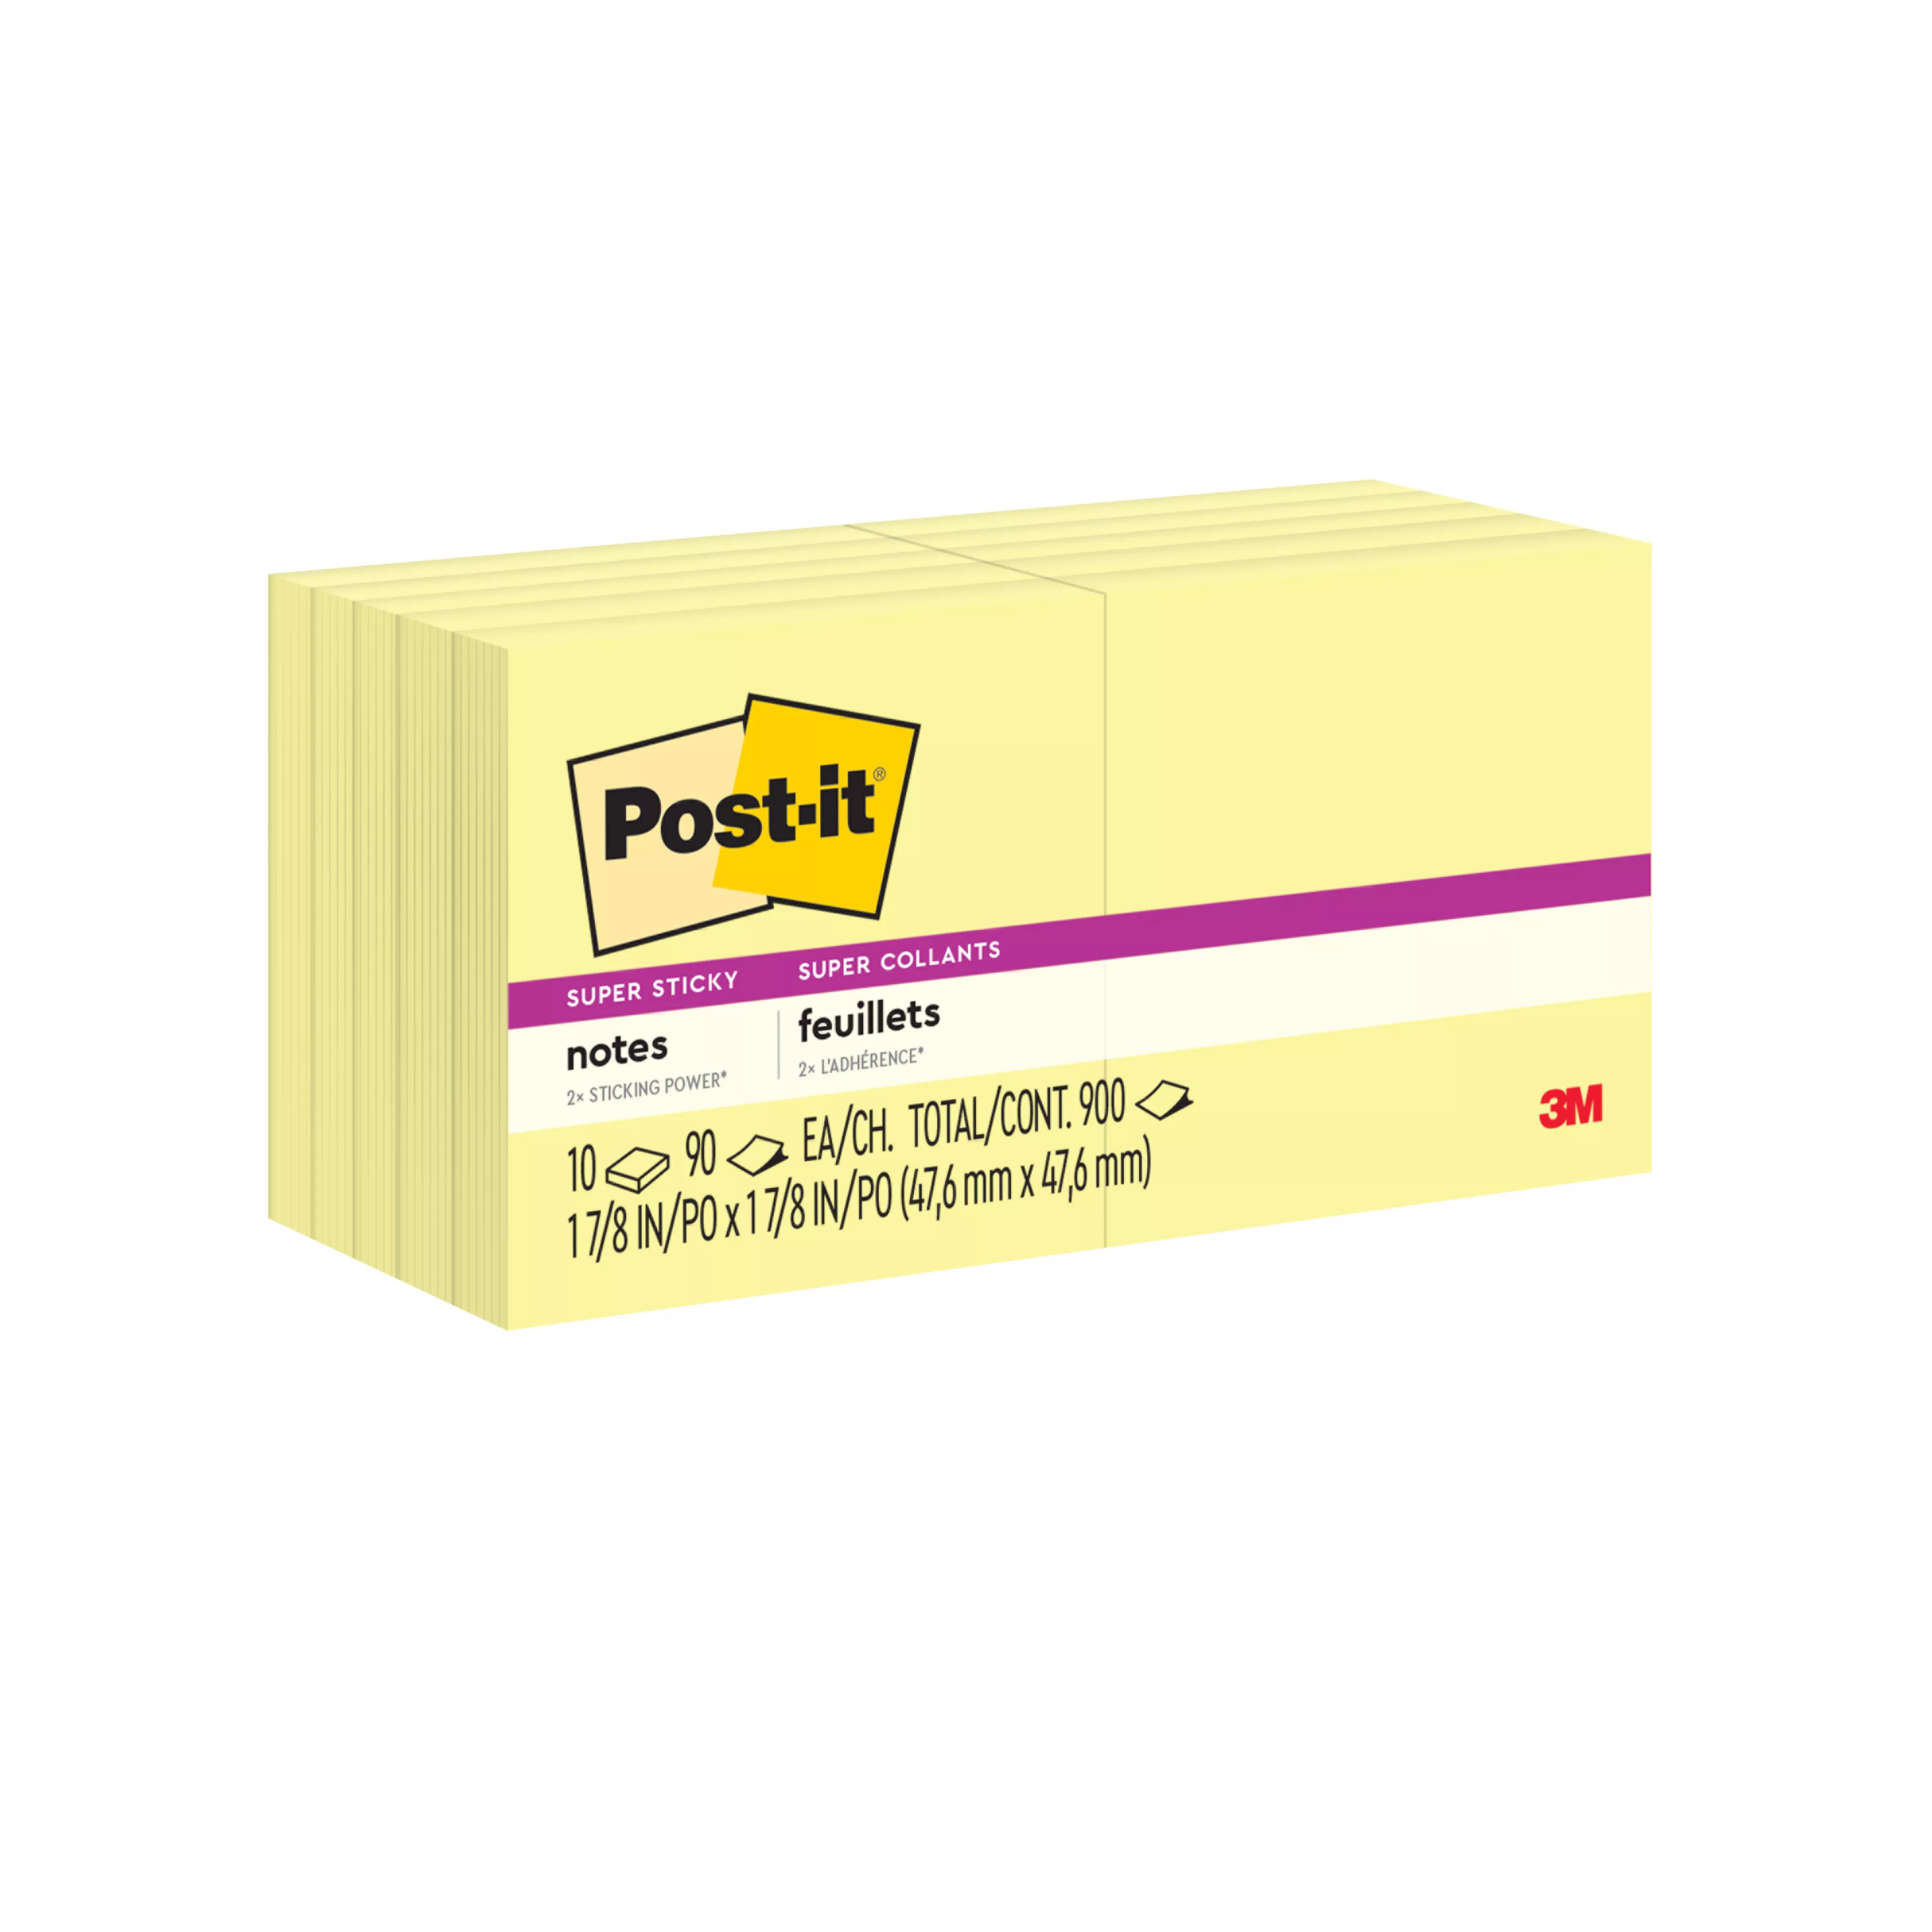 Post-it® Super Sticky Notes 622-10SSCY, 1 7/8 in x 1 7/8 in (47.6 mm x 47.6 mm)